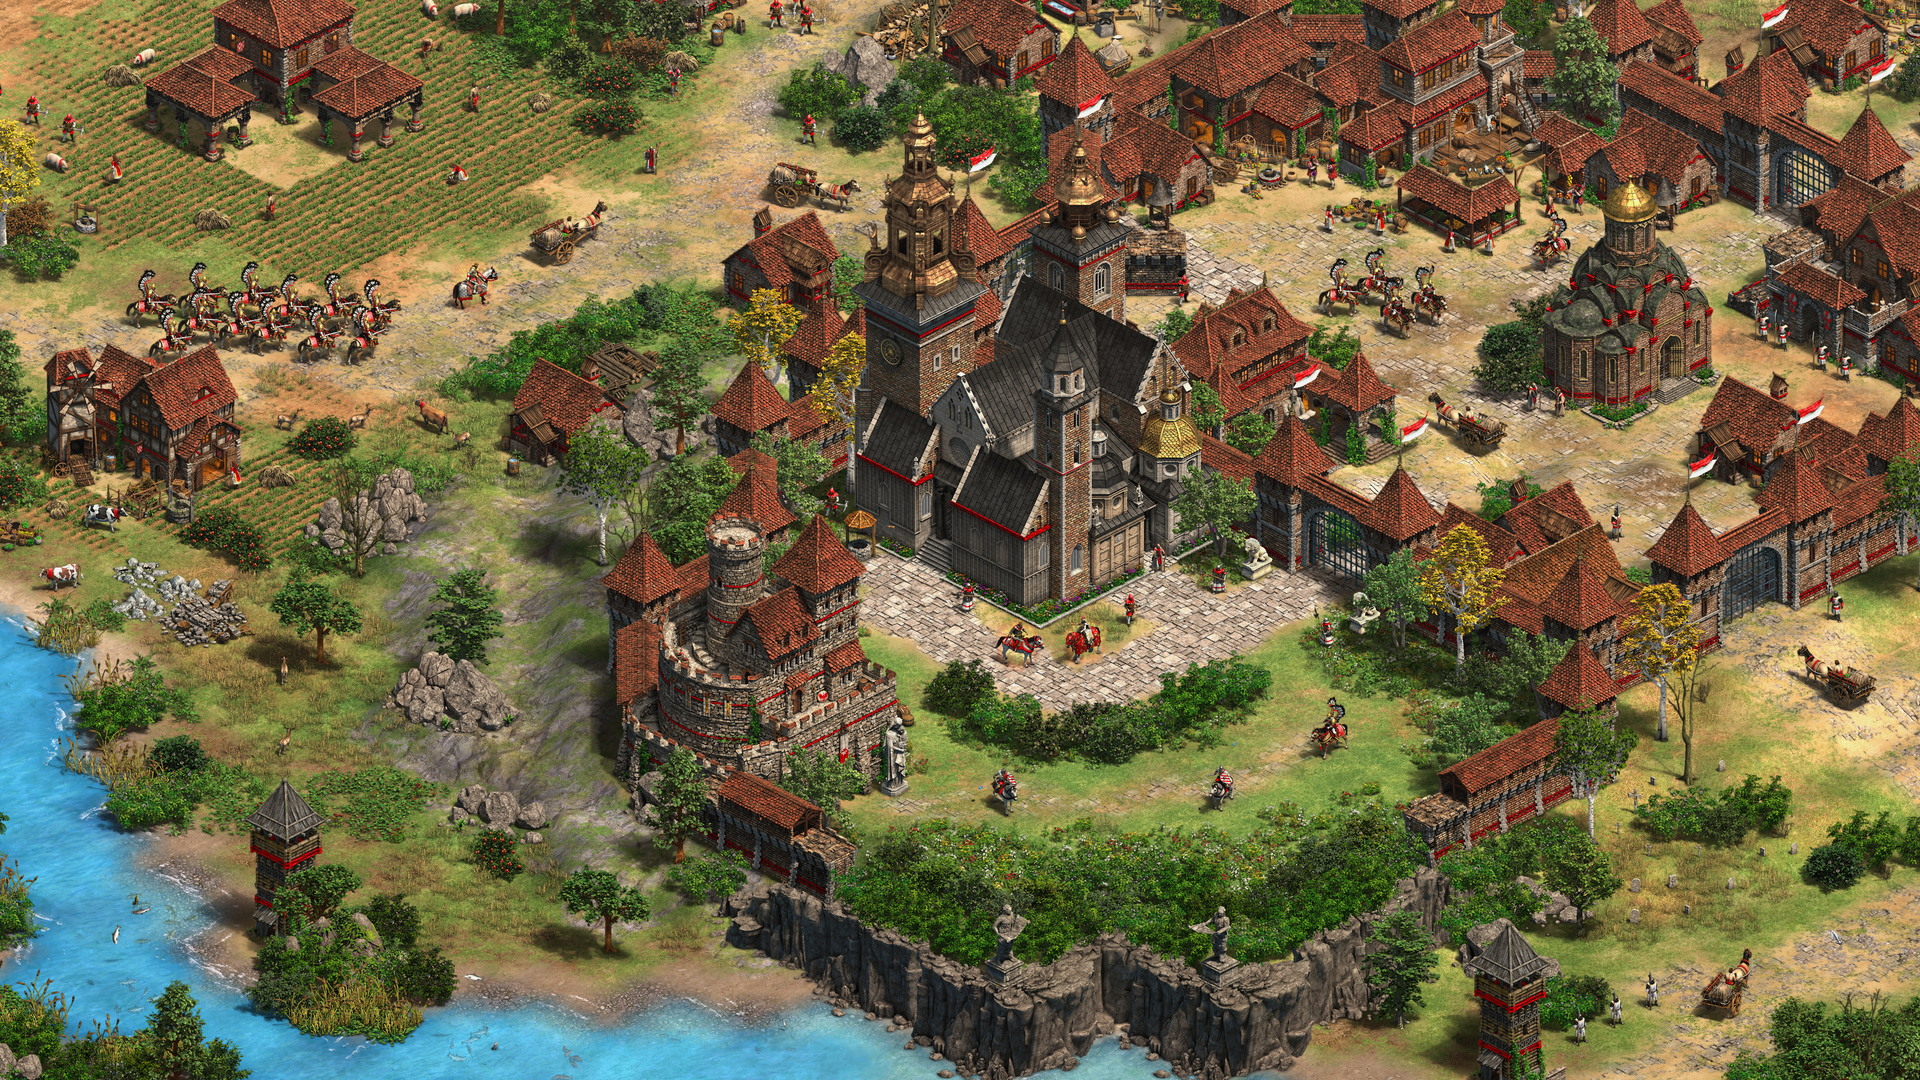 Age of Empires II: Definitive Edition - Dawn of the Dukes - screenshot 5